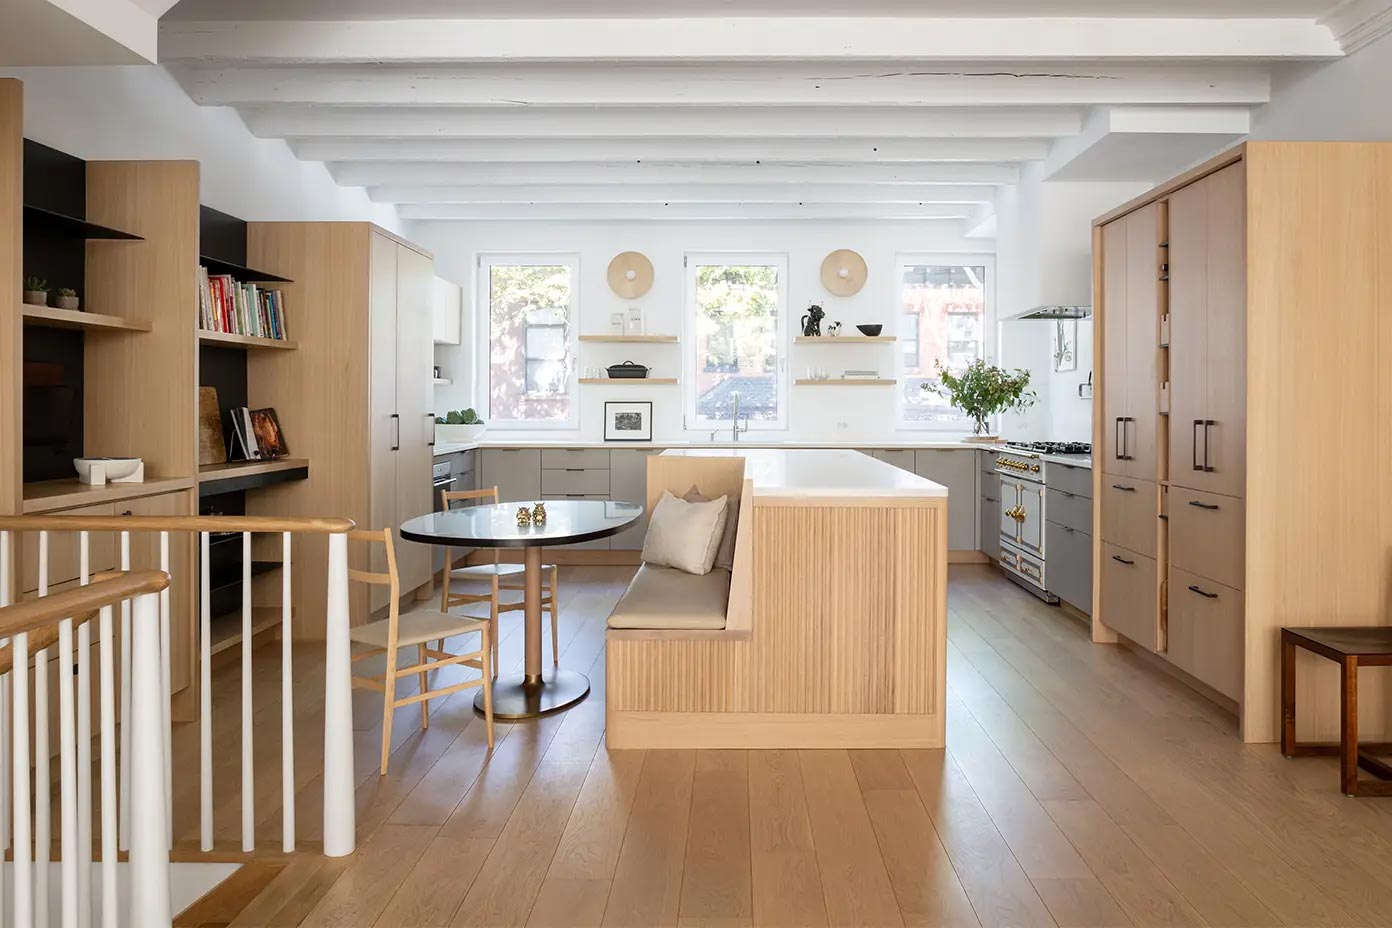 Buyers Are Laser Focused on Kitchen Islands This Spring—Here’s What Makes One Stand Out